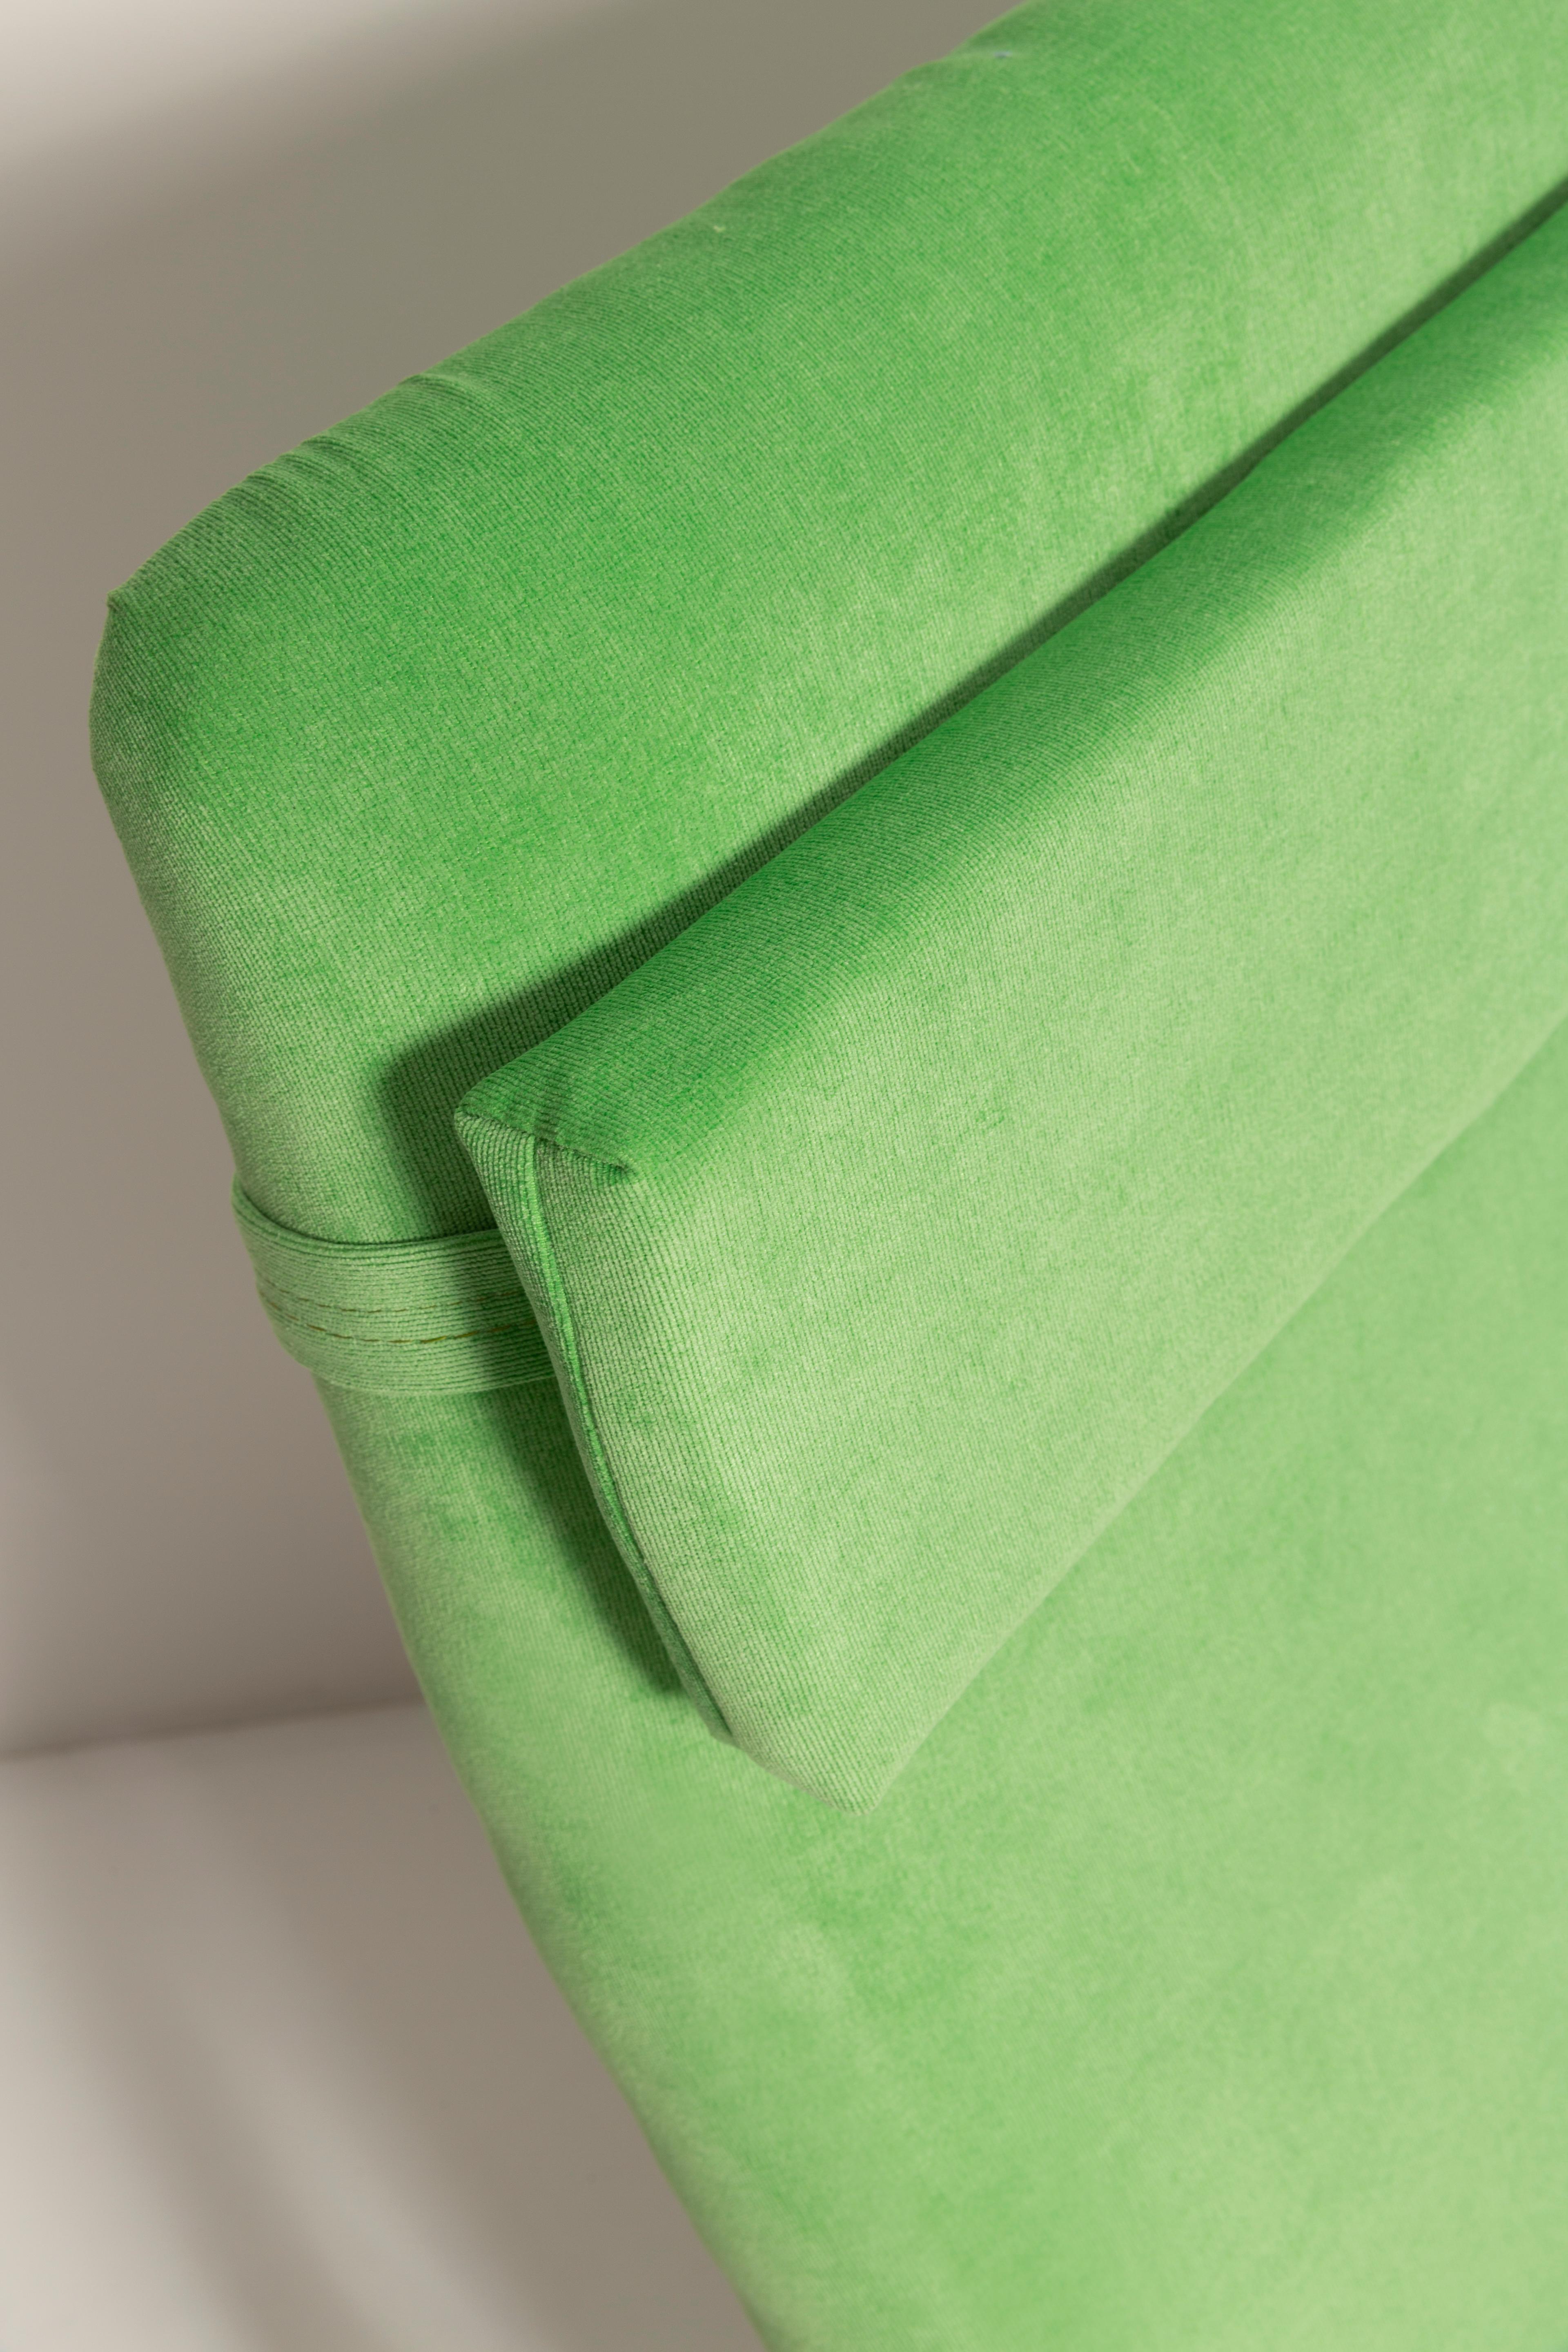 Hand-Crafted Light Lime Green Velvet Armchair, GFM-64 High, Edmund Homa, 1960s For Sale